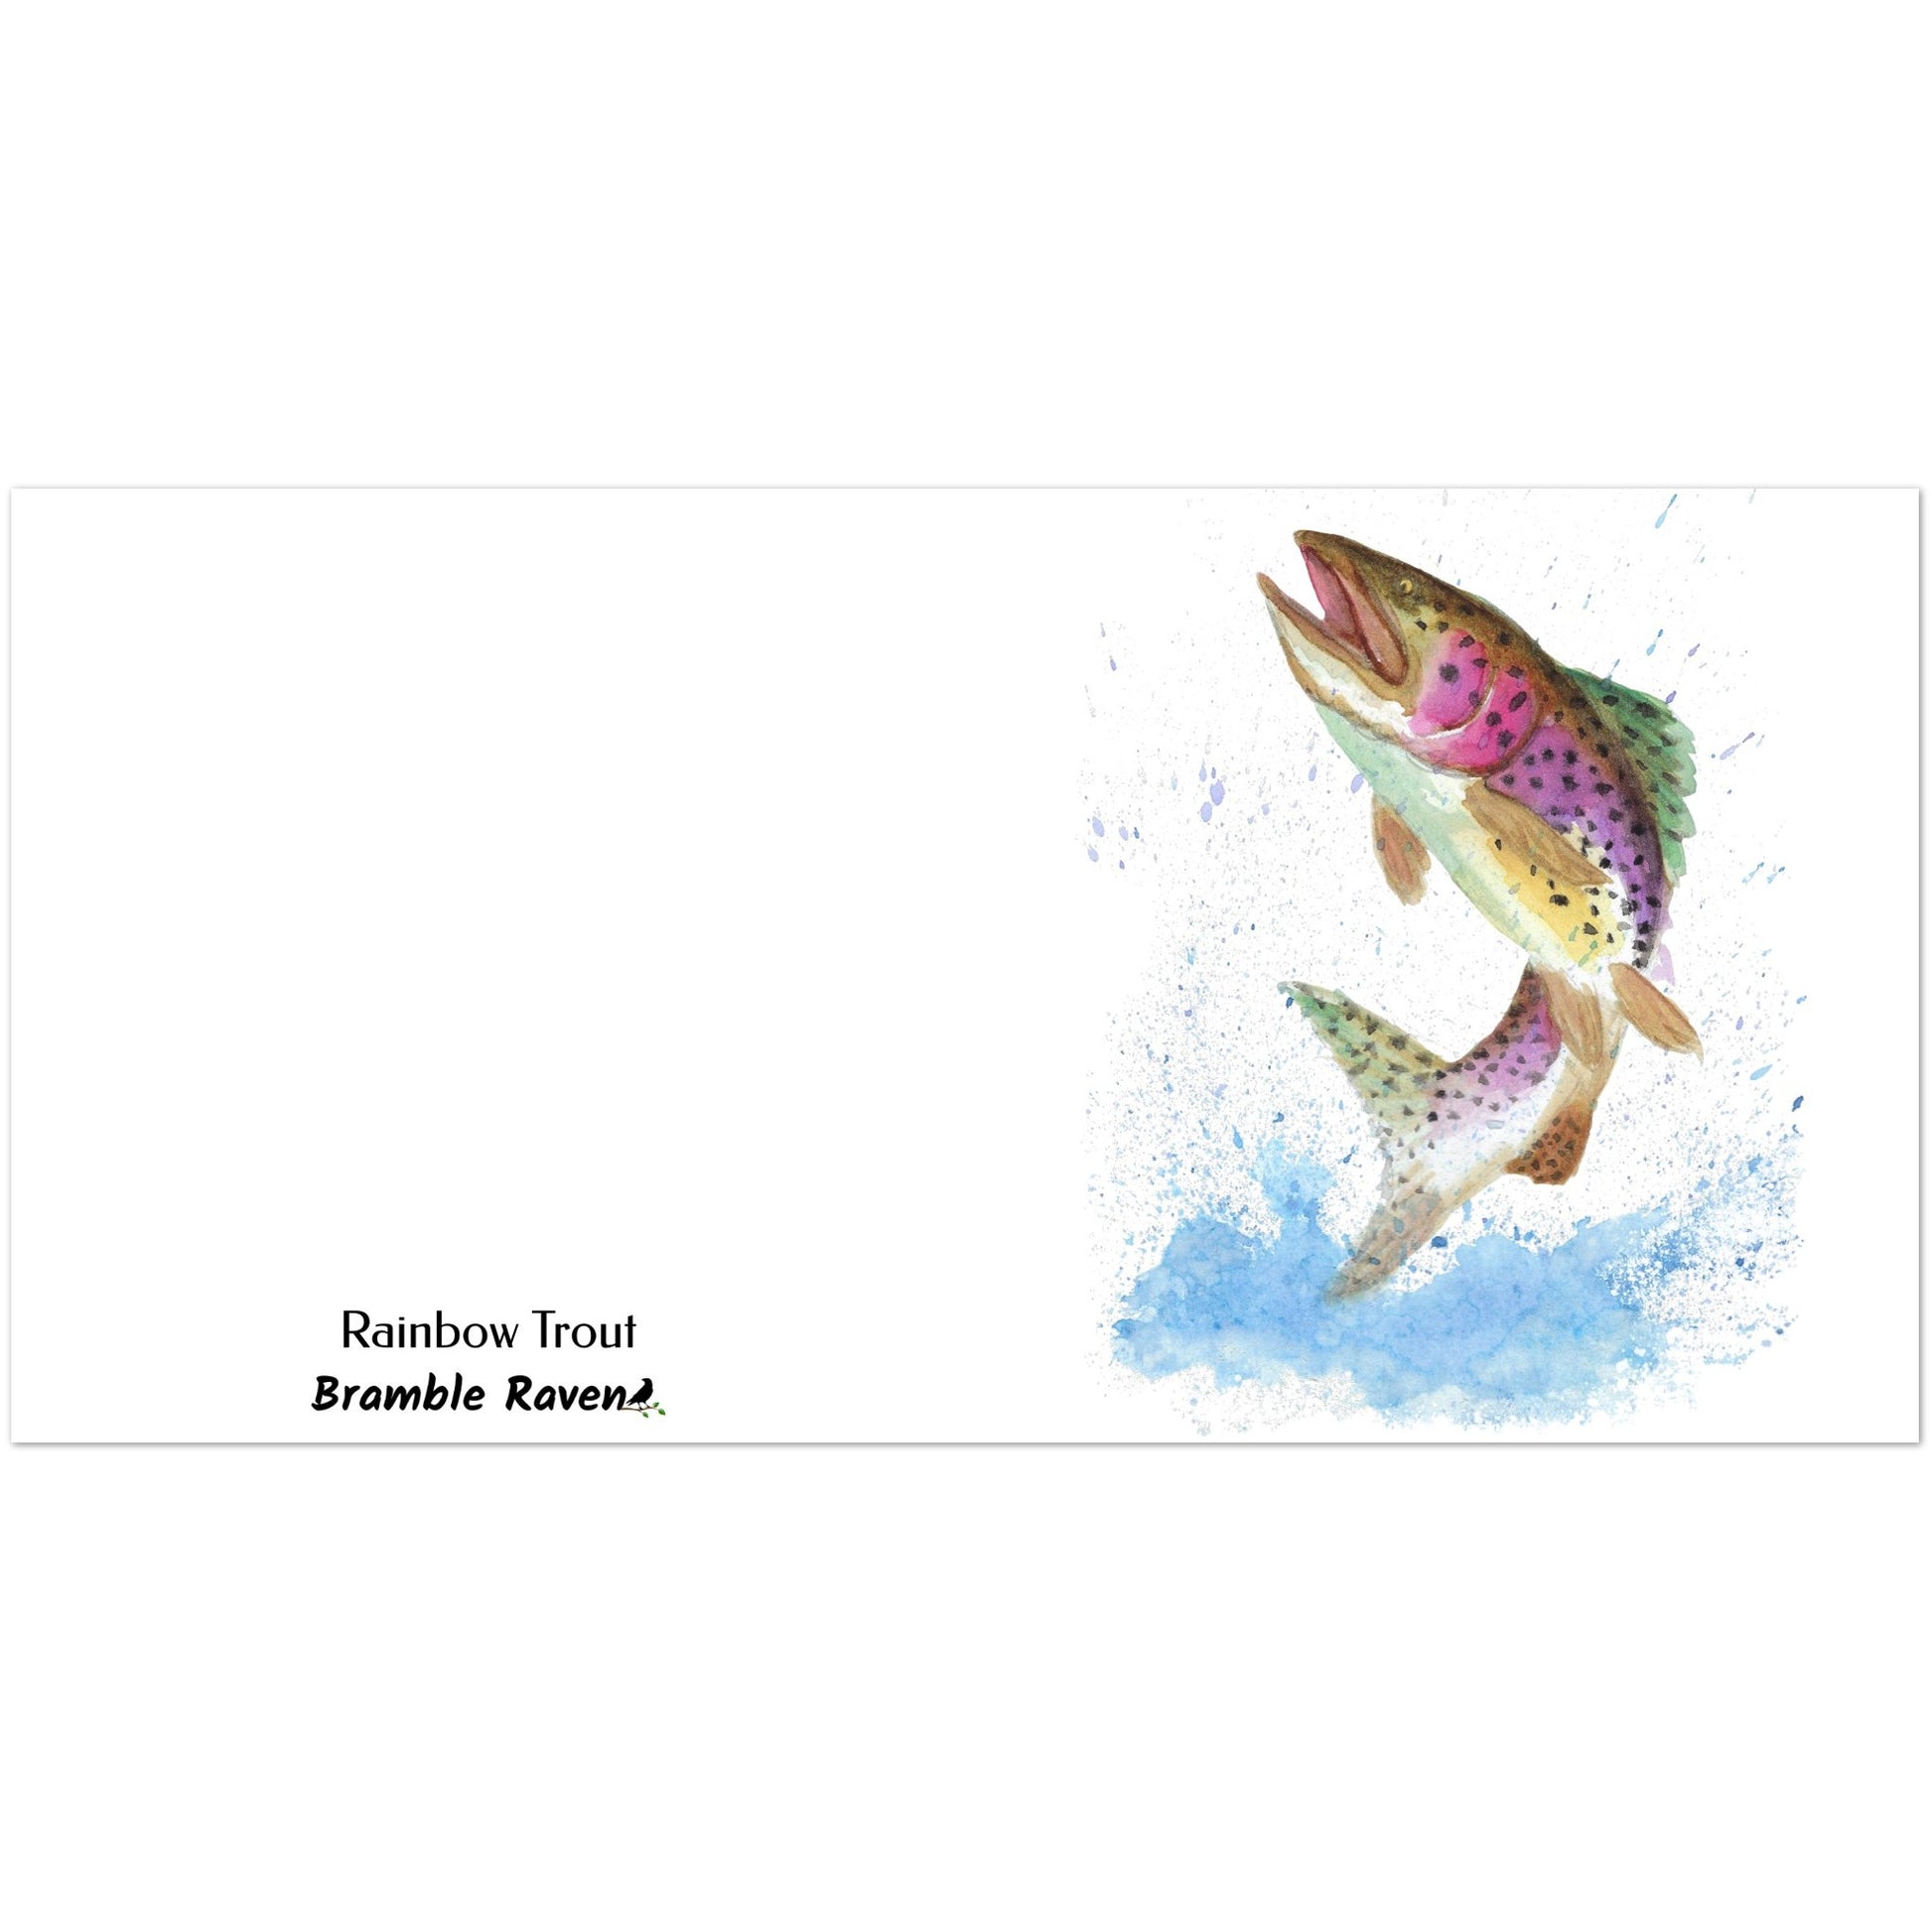 Ten greeting cards with print of watercolor rainbow trout on the front. Inside is blank. Comes with envelopes. Cards measure 5.25 by 5.25 inches. Made with 350 gsm 150lb coated paperboard with vibrant printing.